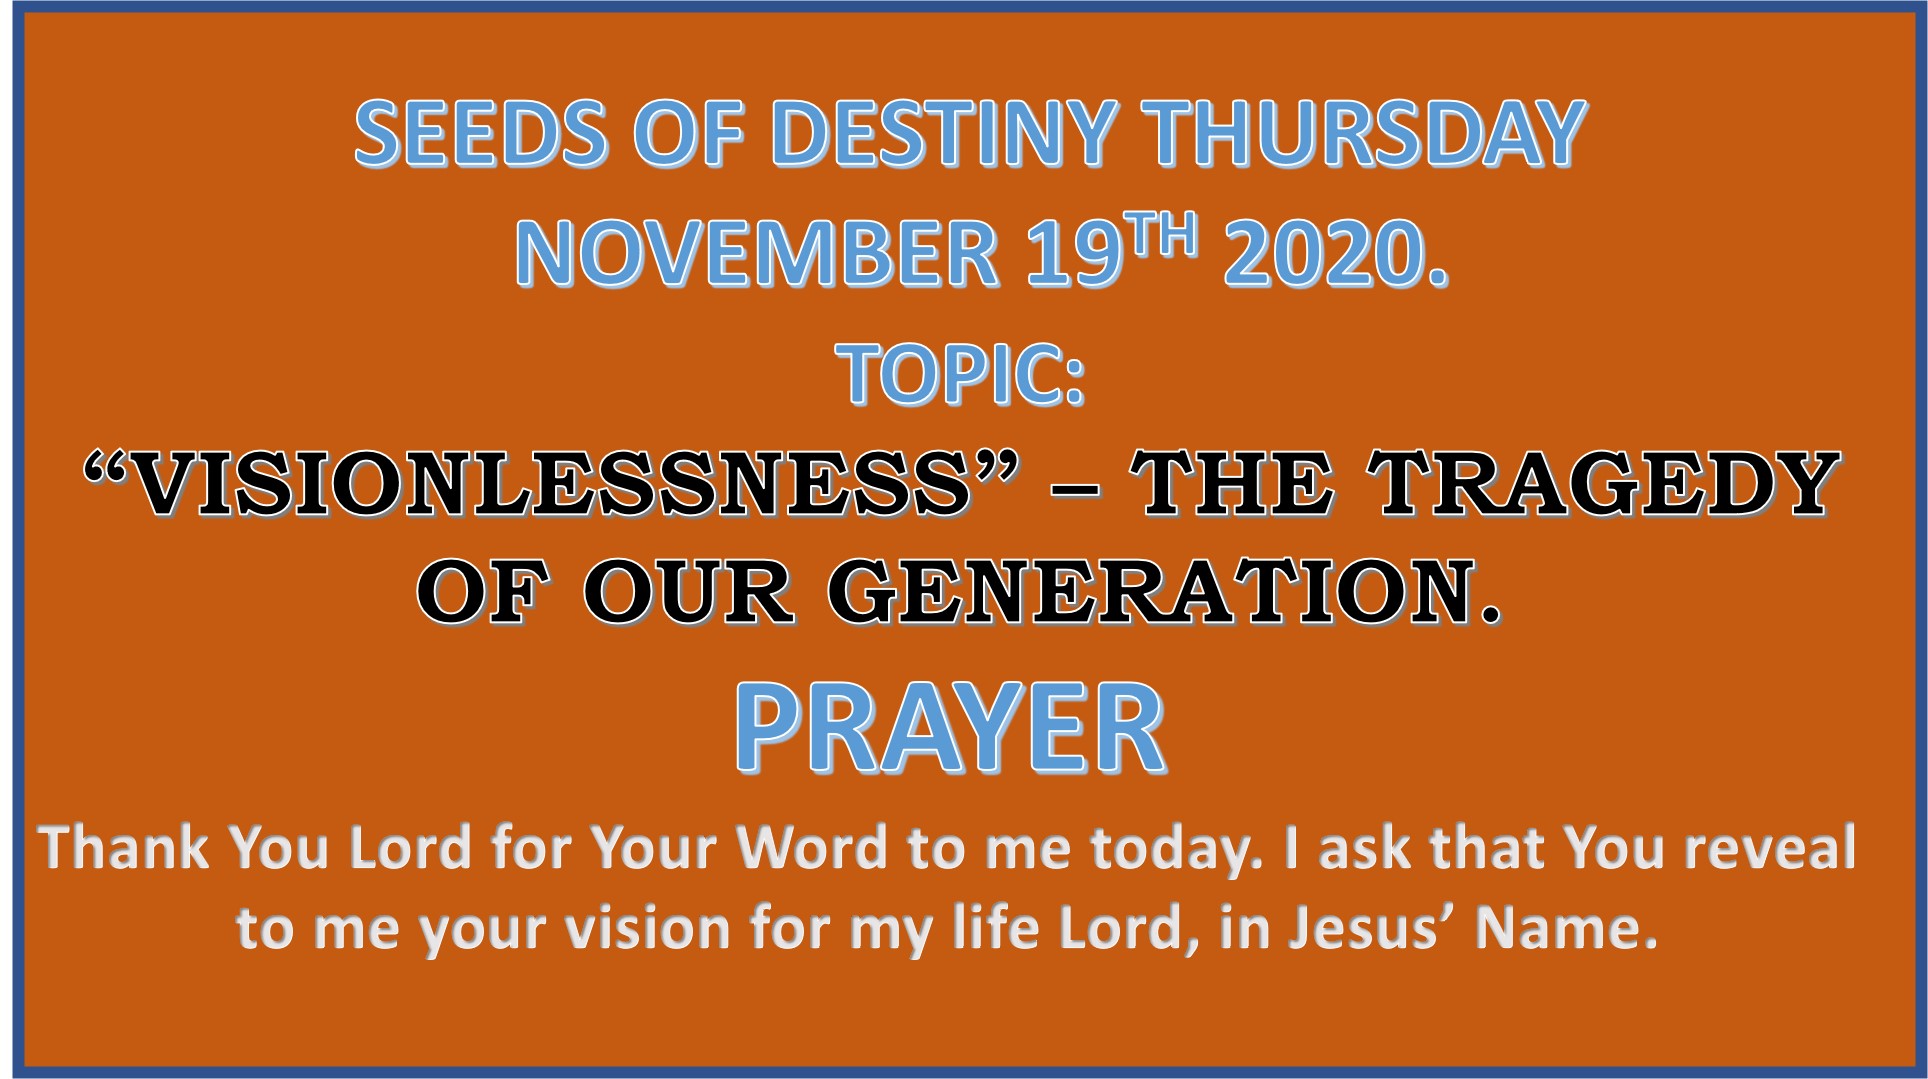 Seeds of Destiny Thursday 19th November 2020 by Dr Paul Enenche